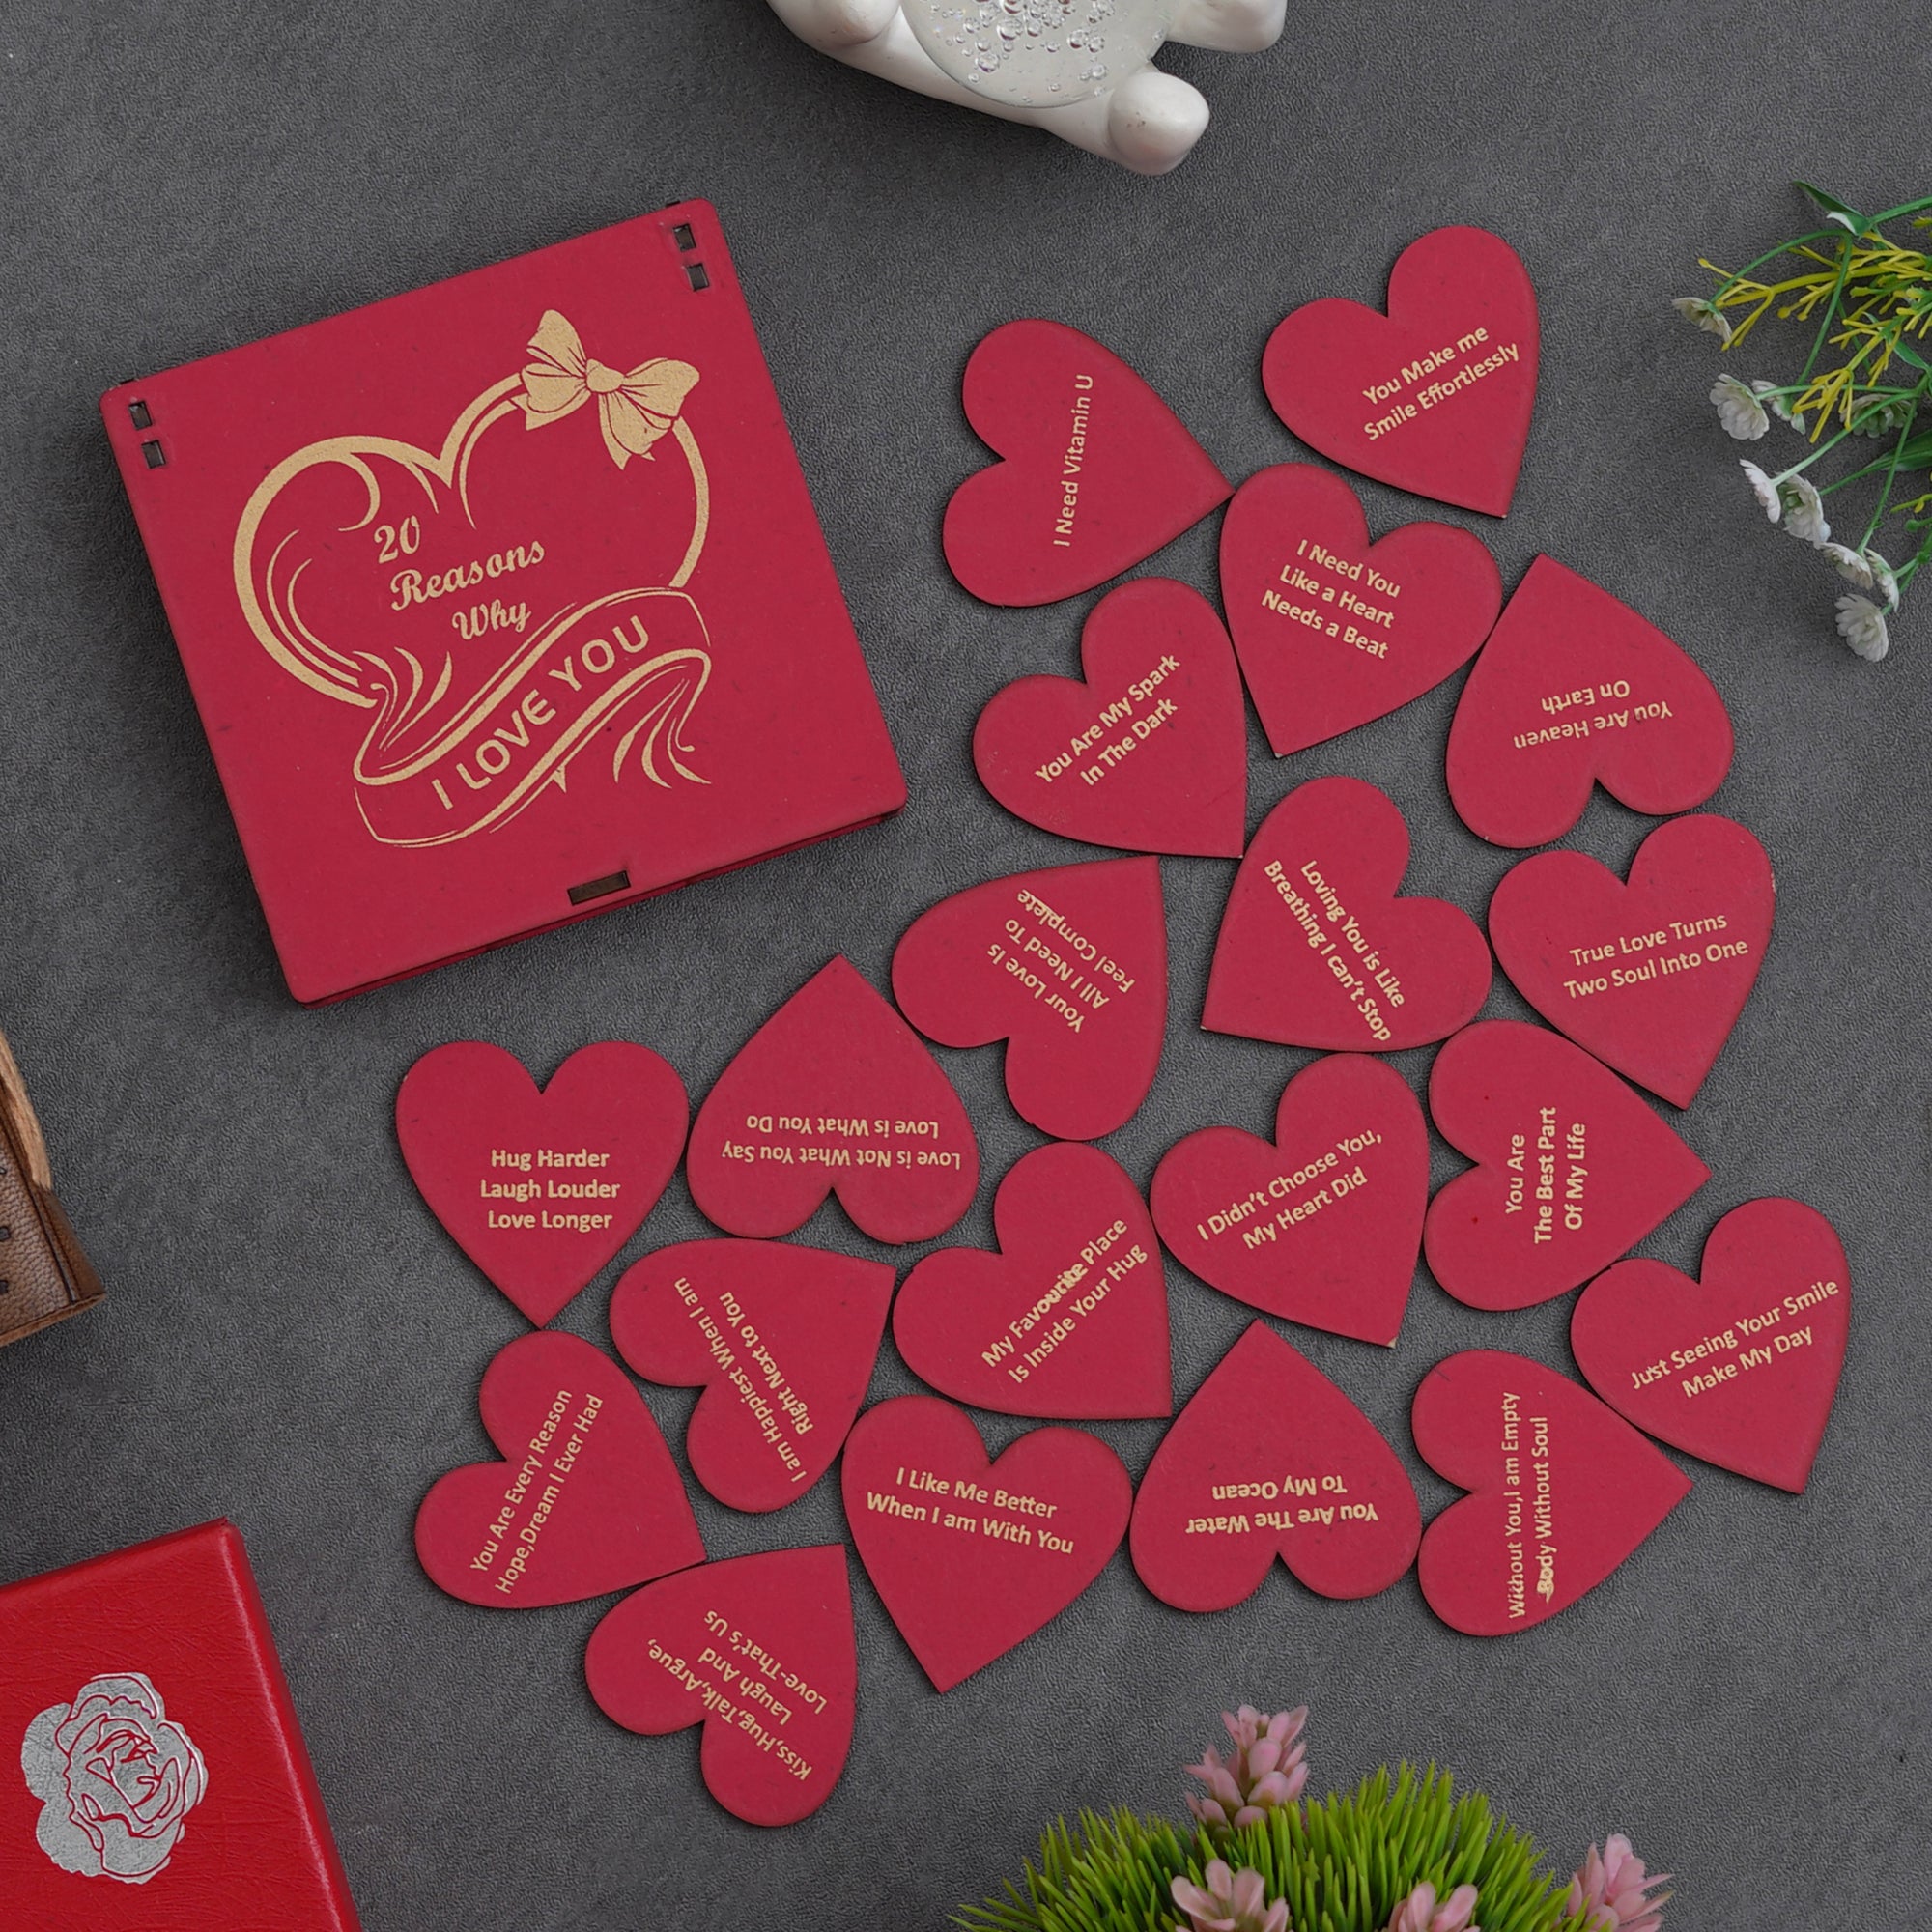 Valentine Combo of Set of 8 Love Post Cards Gift Cards Set, Golden Rose Gift Set, "20 Reasons Why I Love You" Printed on Little Red Hearts Decorative Wooden Gift Set Box 5